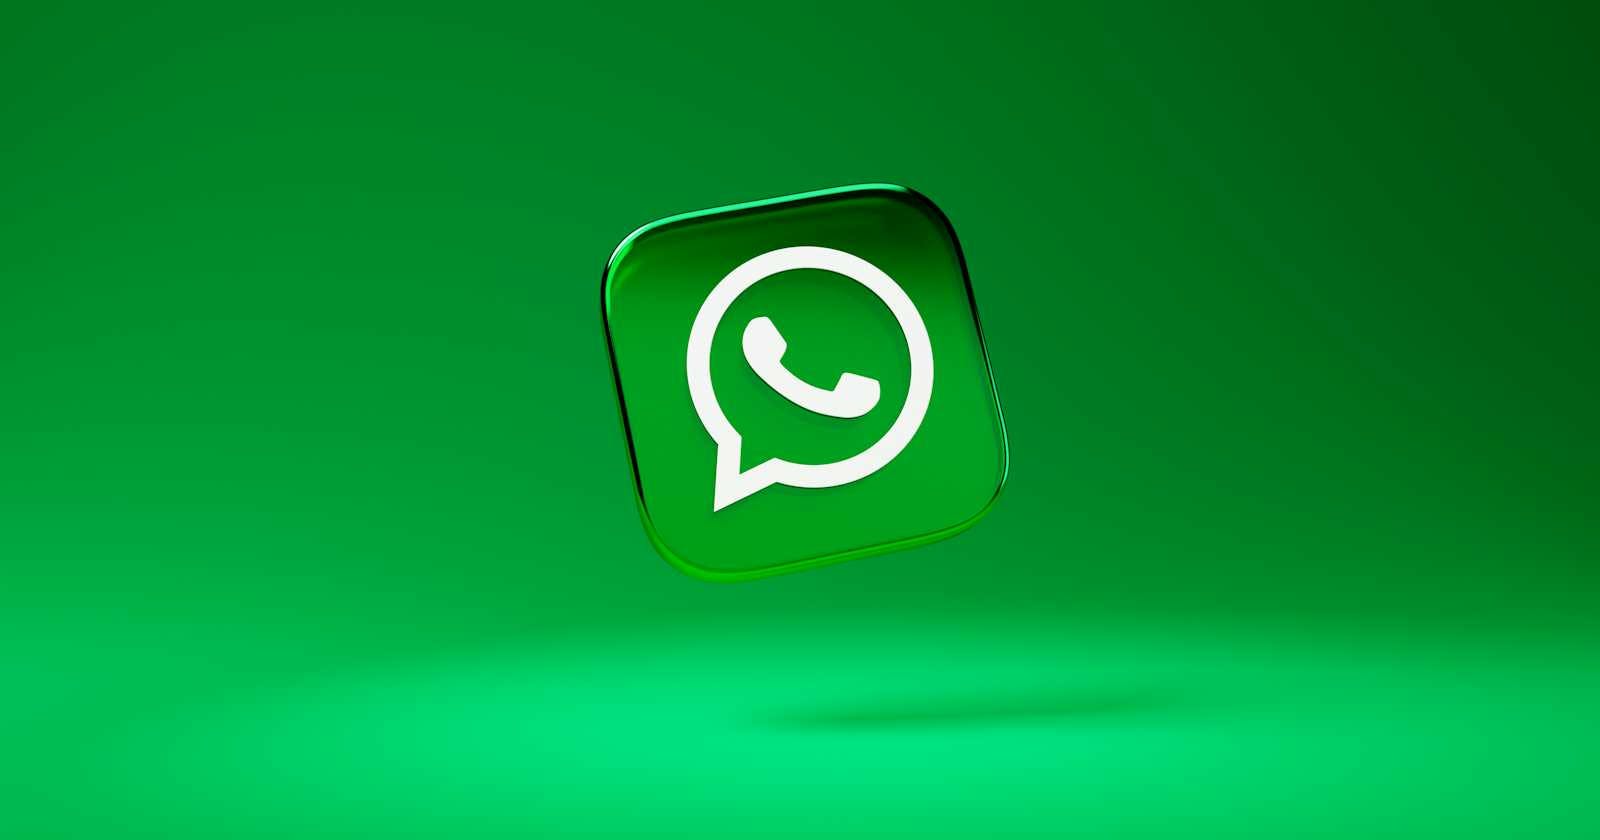 Breaking Boundaries: Customizing WhatsApp Without Compromising Security